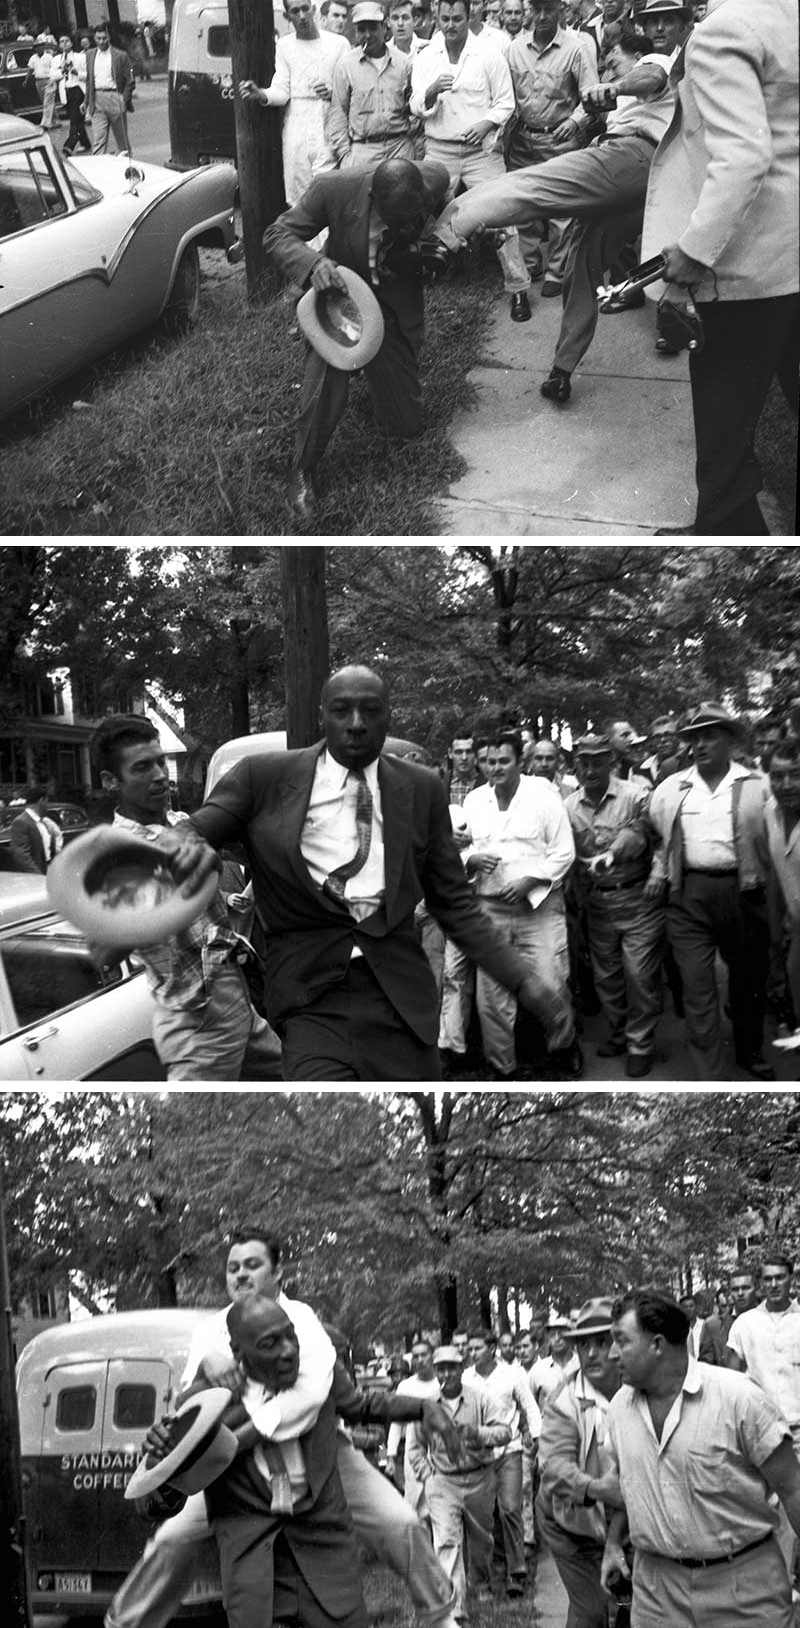 An angry mob assaults L. Alex Wilson, editor of the Memphis-based weekly The Tri-State Defender, in Little Rock, Arkansas in 1957